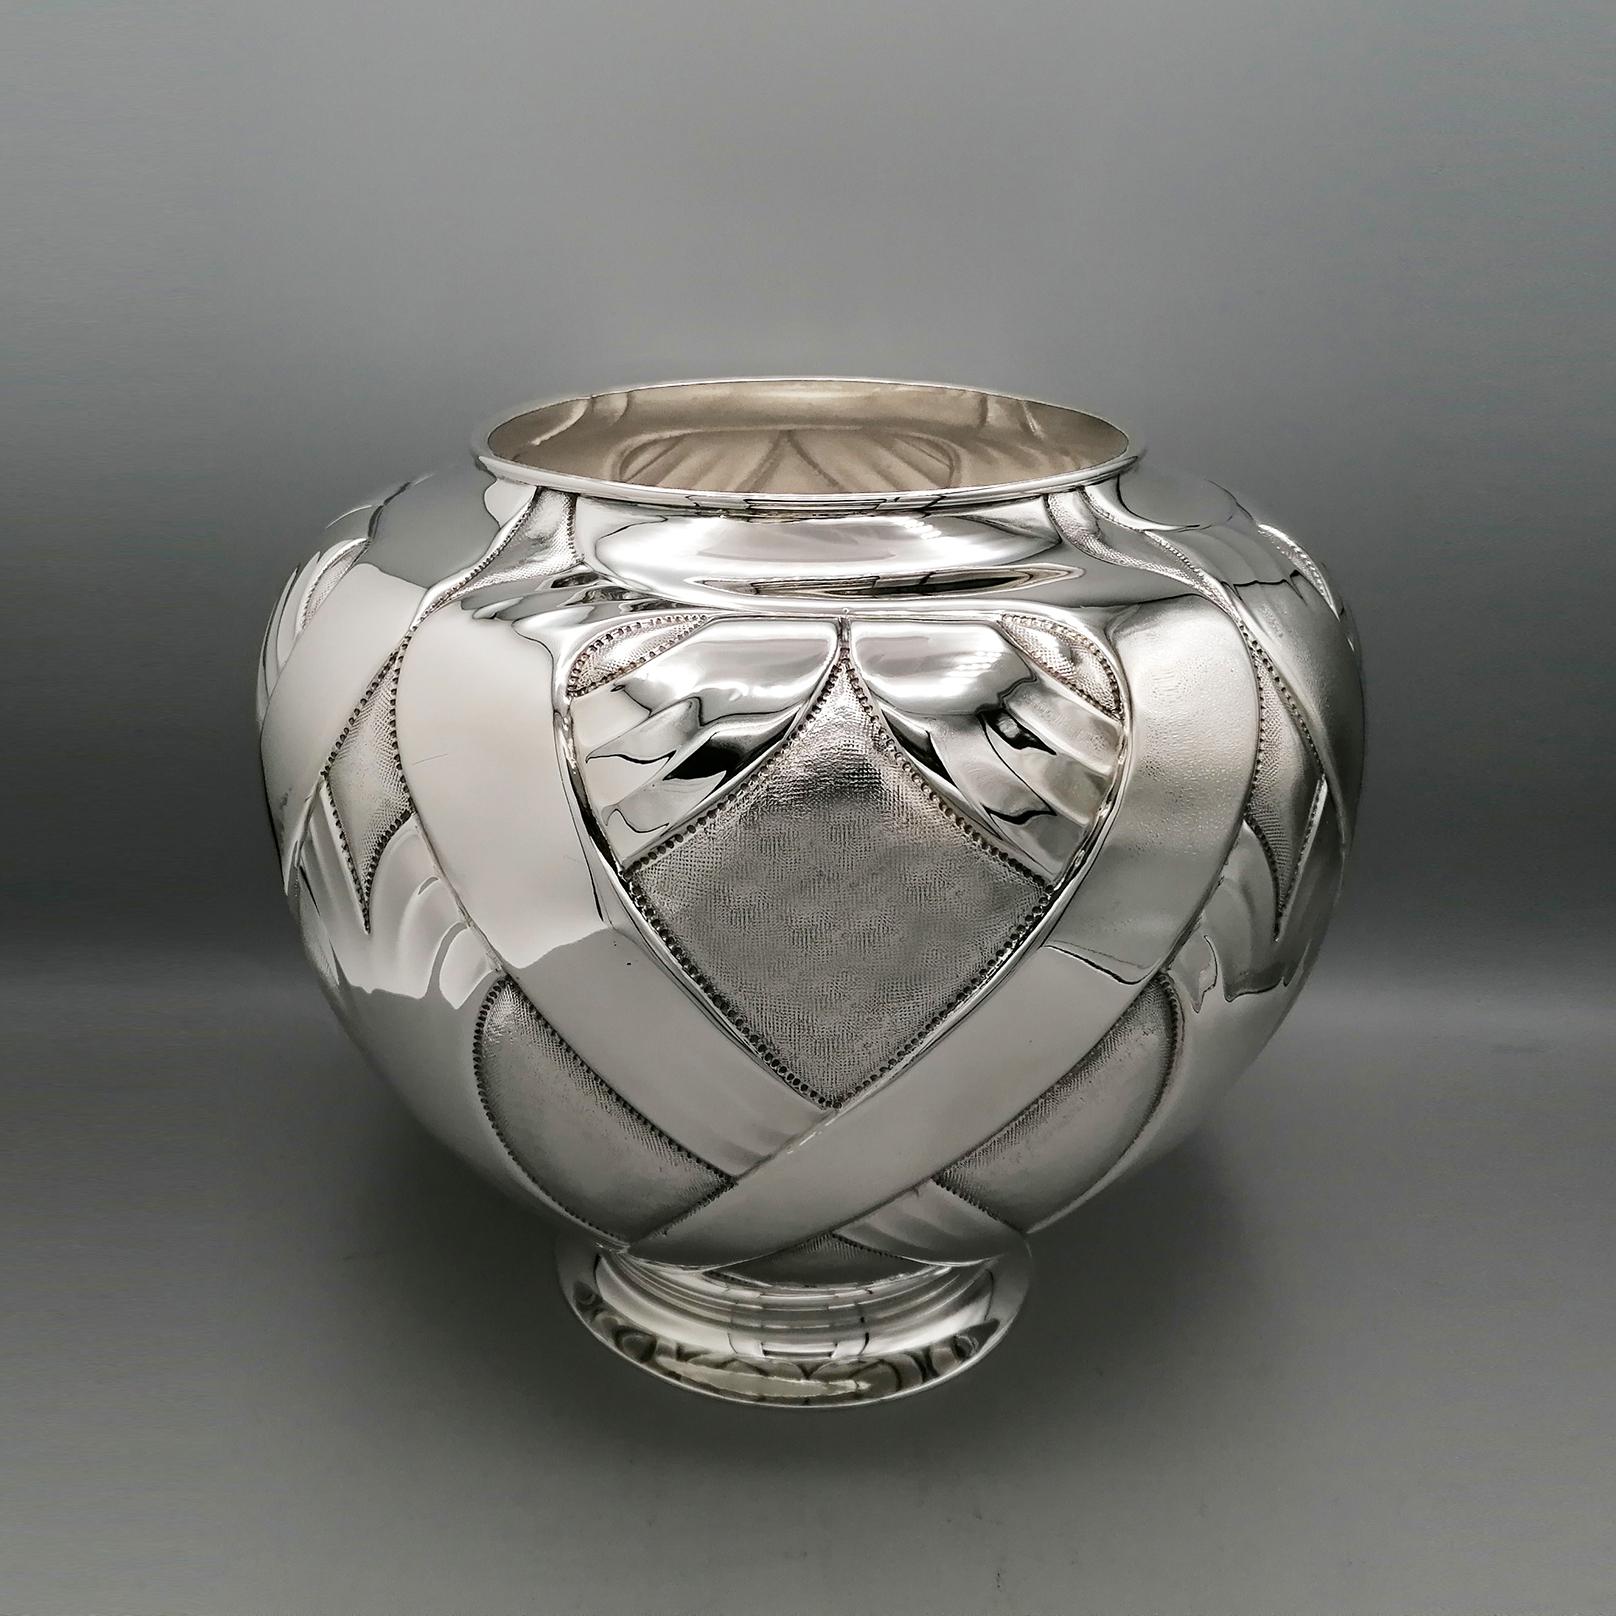 Modern 925 sterling silver vase.
The pot-bellied body has been embossed, chiselled and engraved with modern motifs, interspersed with fine knurling carried out to highlight the handwork.
A silver plate base was welded under the vase, left